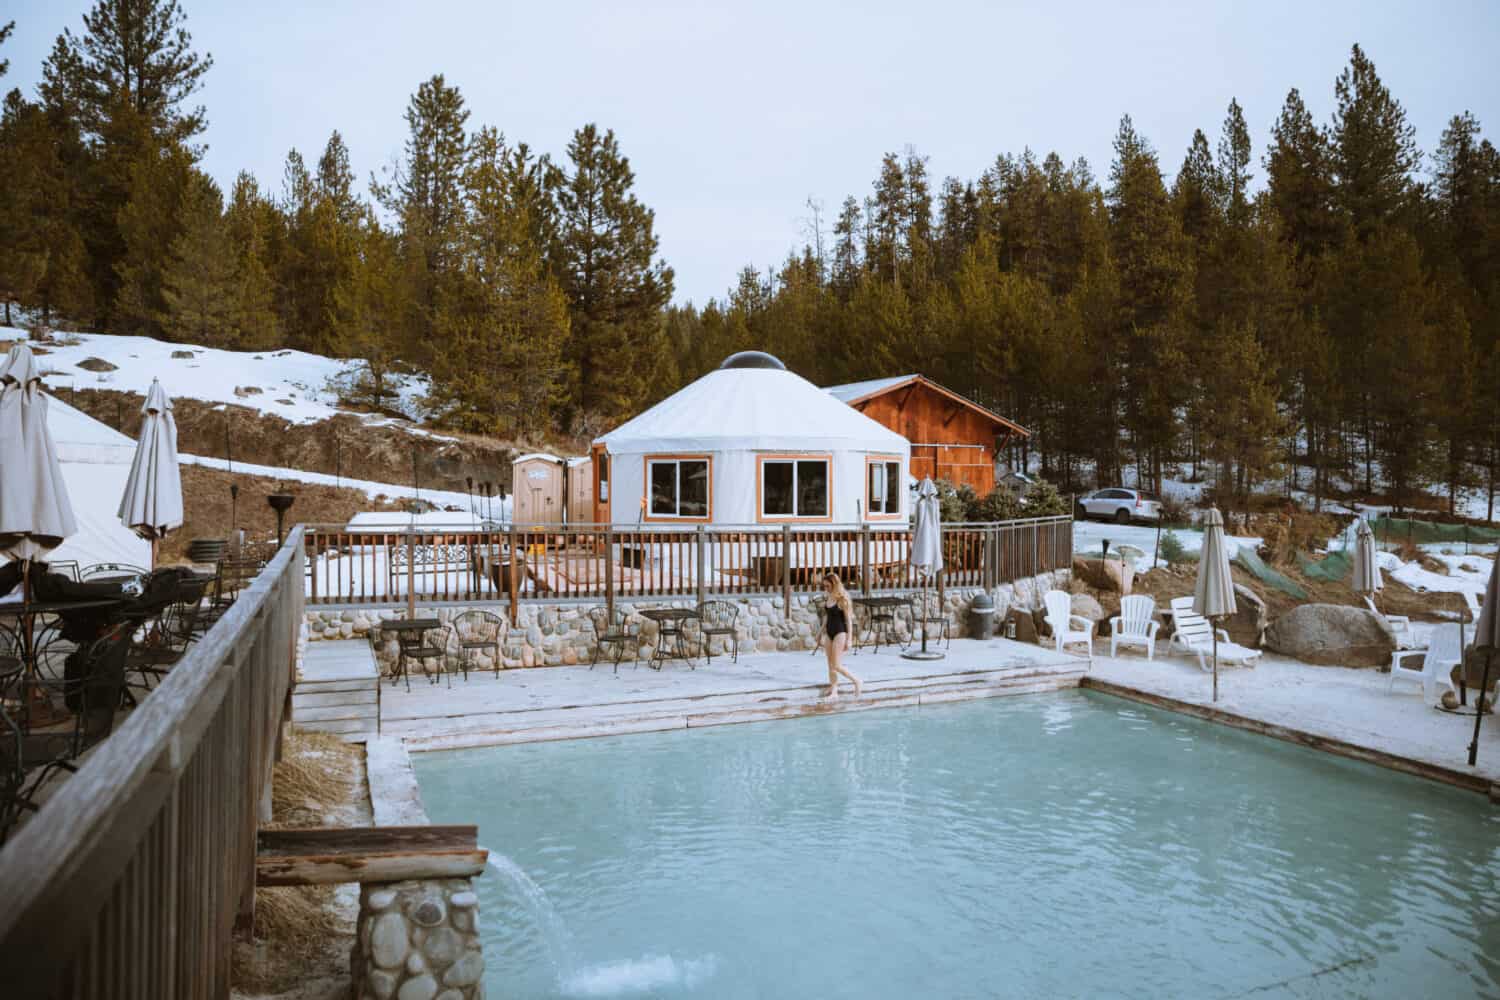 Places To Visit In Idaho - Gold Fork Hot Springs